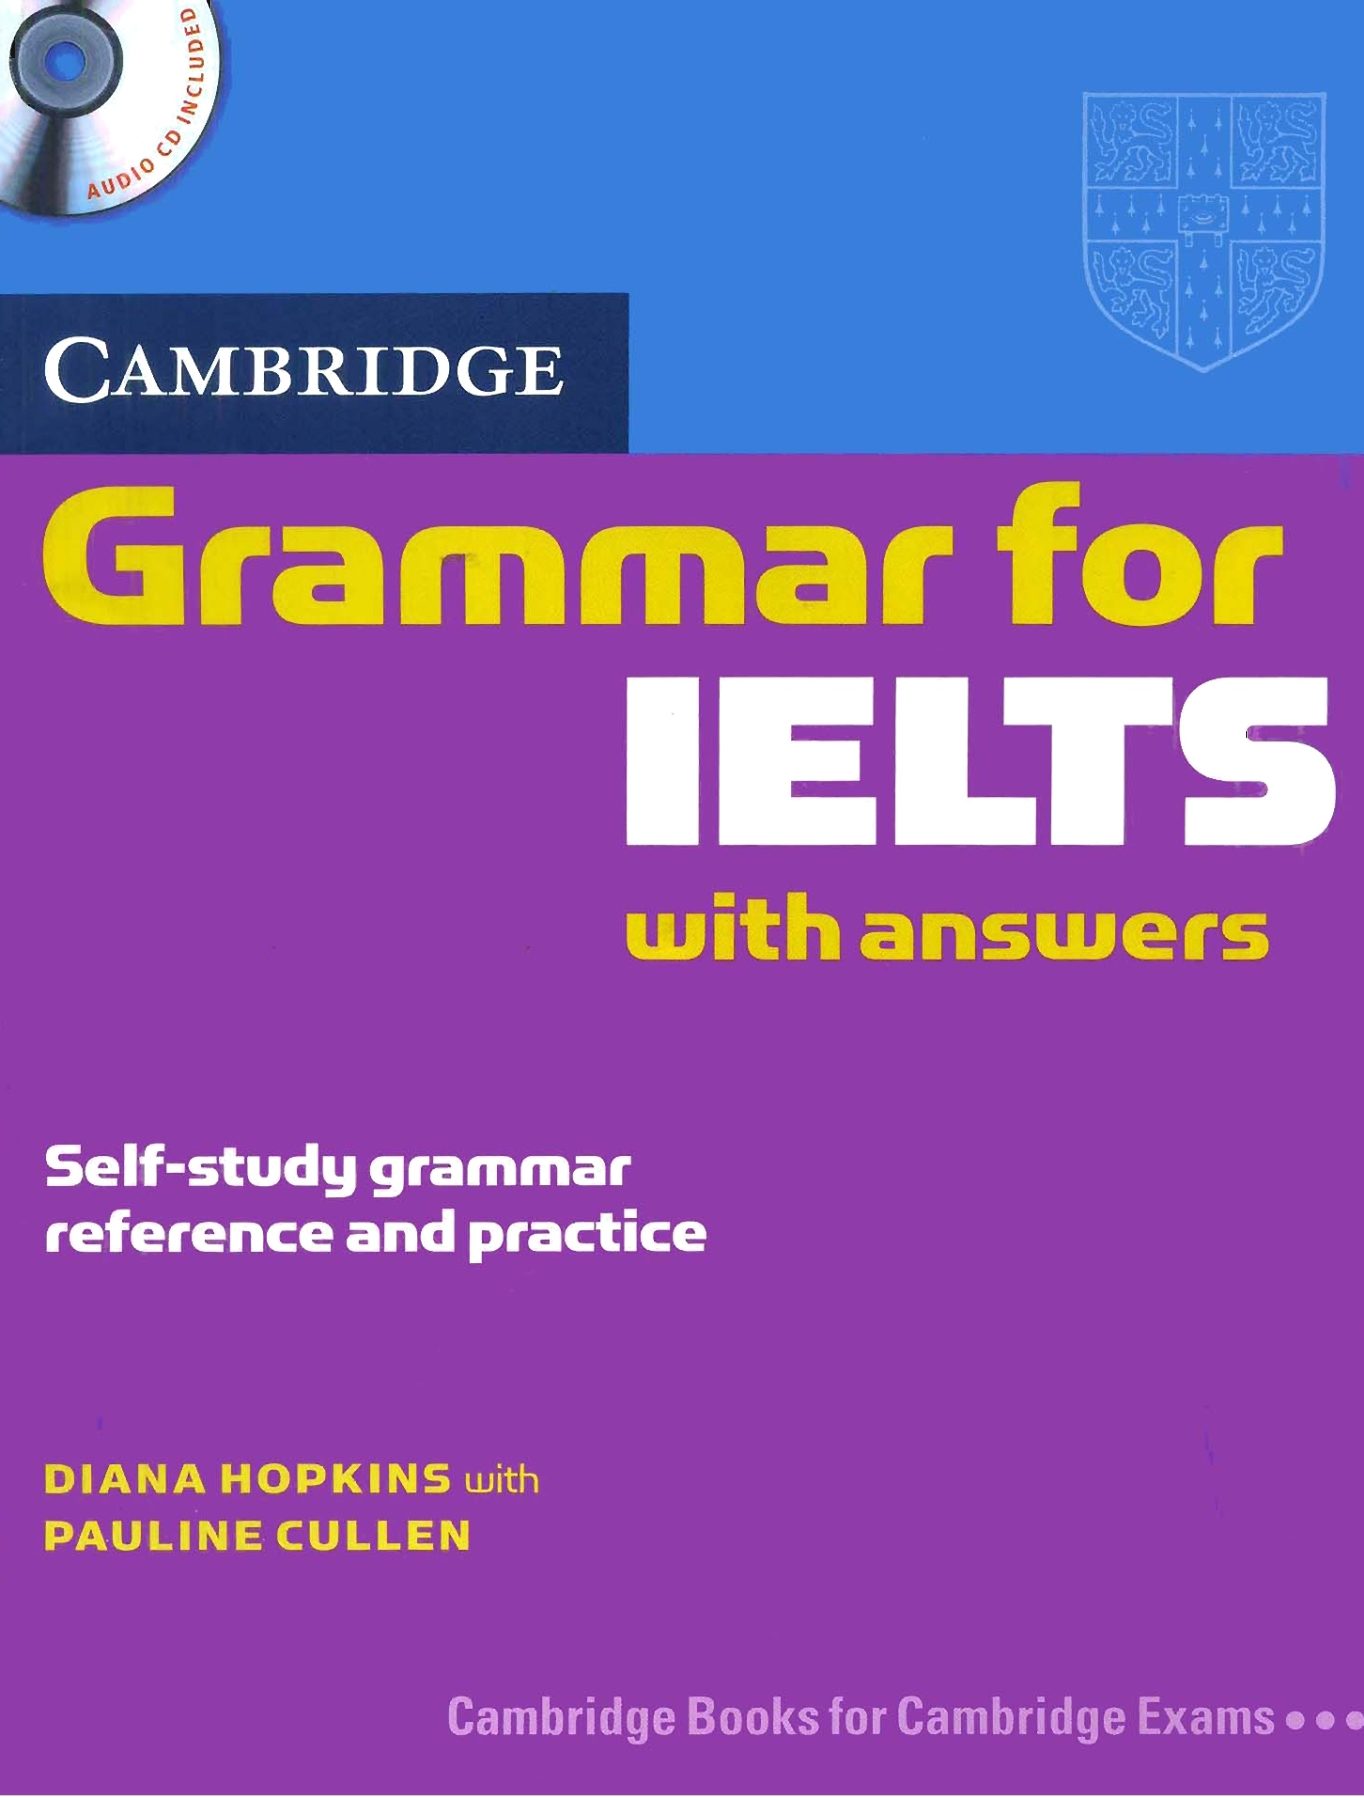 cambridge-grammar-for-ielts-with-answers-pdf-free-download